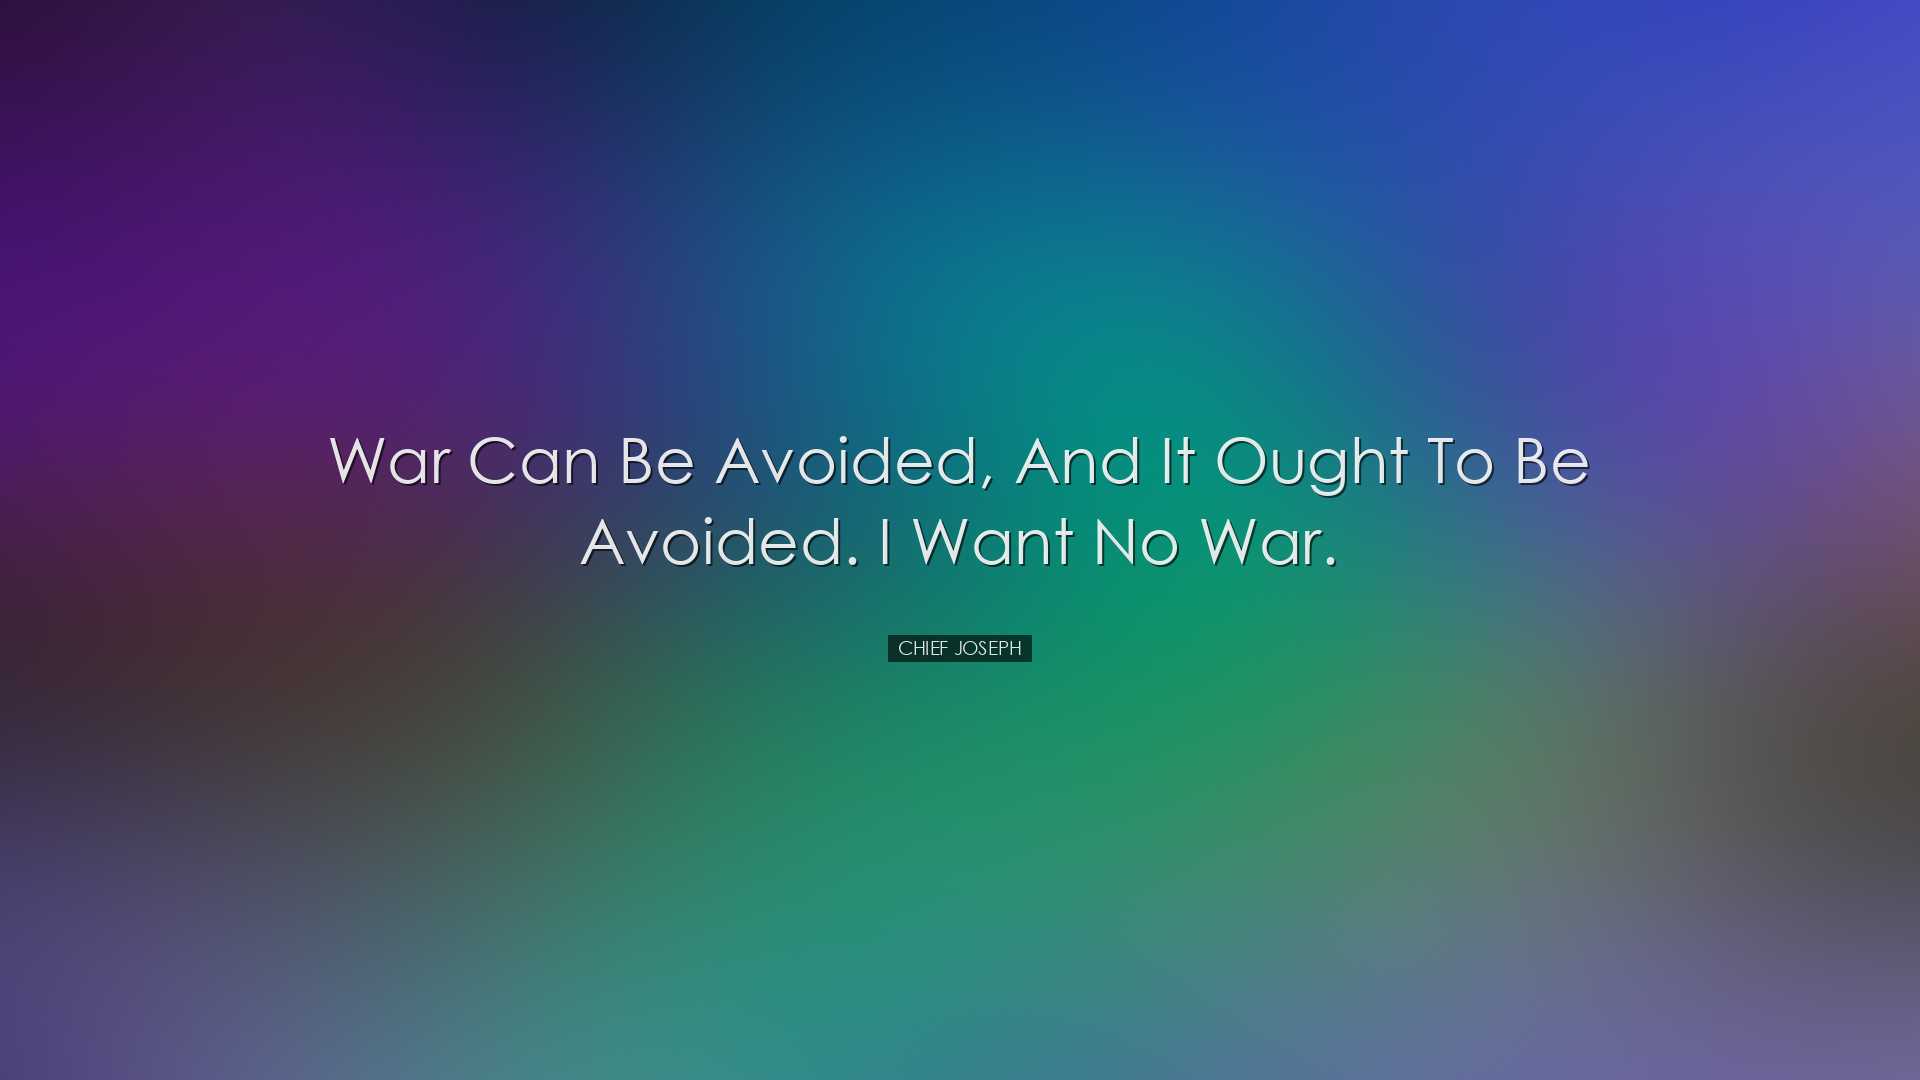 War can be avoided, and it ought to be avoided. I want no war. - C